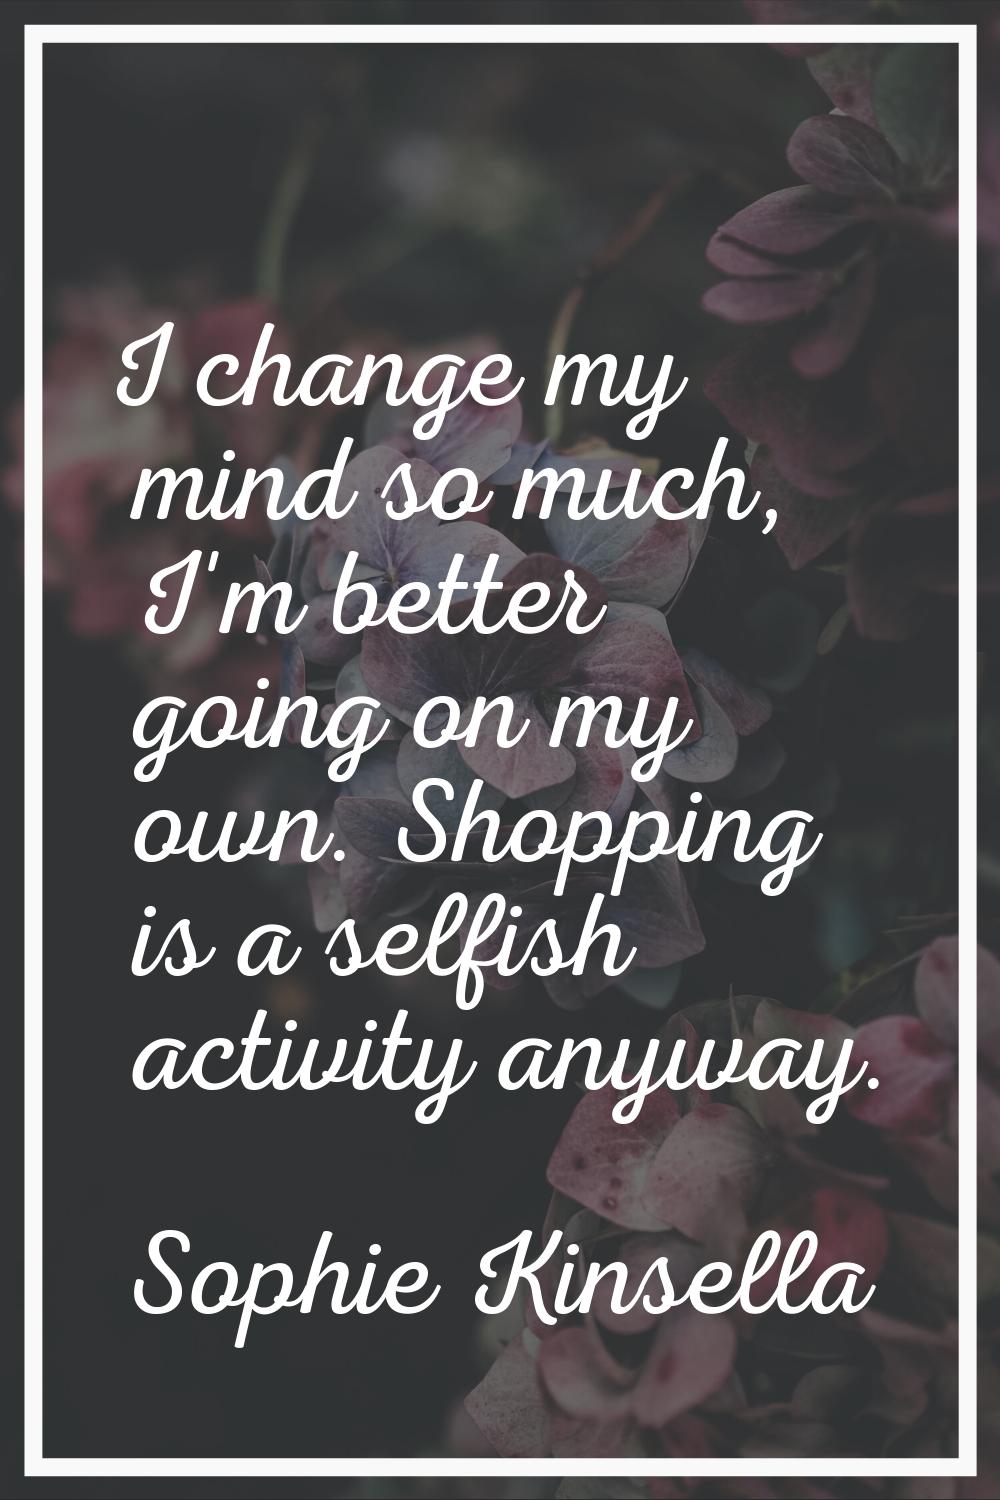 I change my mind so much, I'm better going on my own. Shopping is a selfish activity anyway.